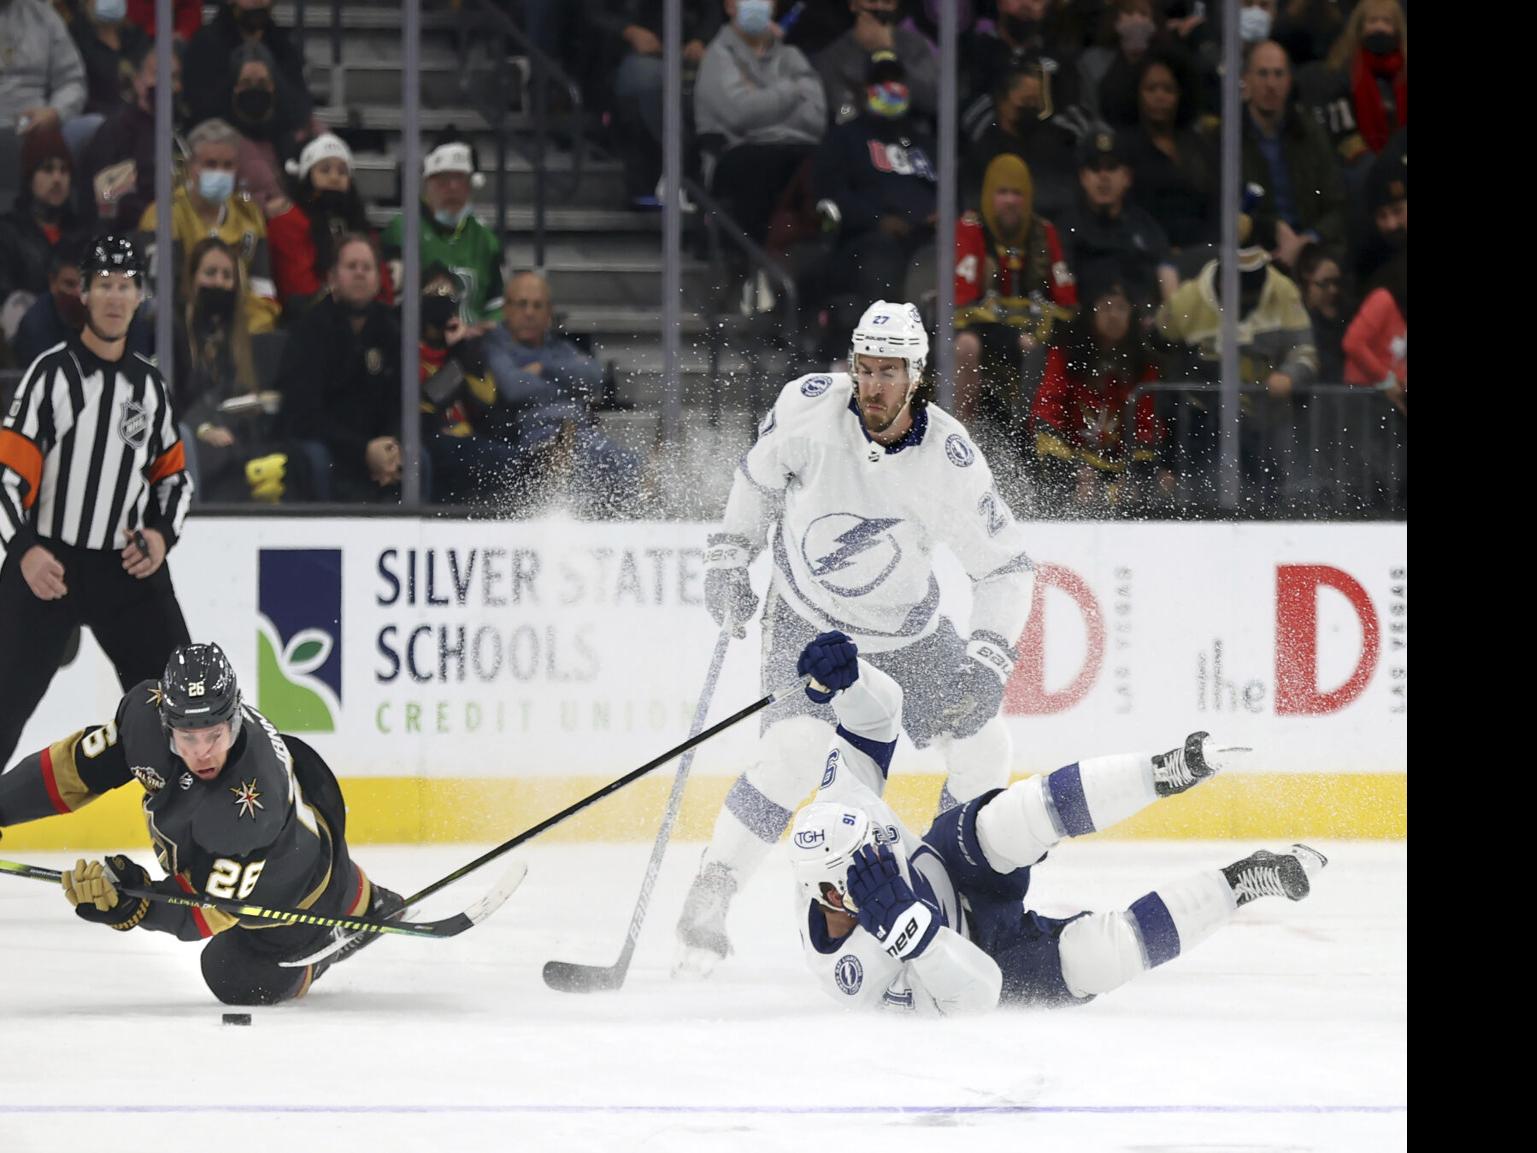 Stamkos skates, but 'still a real possibility' he won't play in